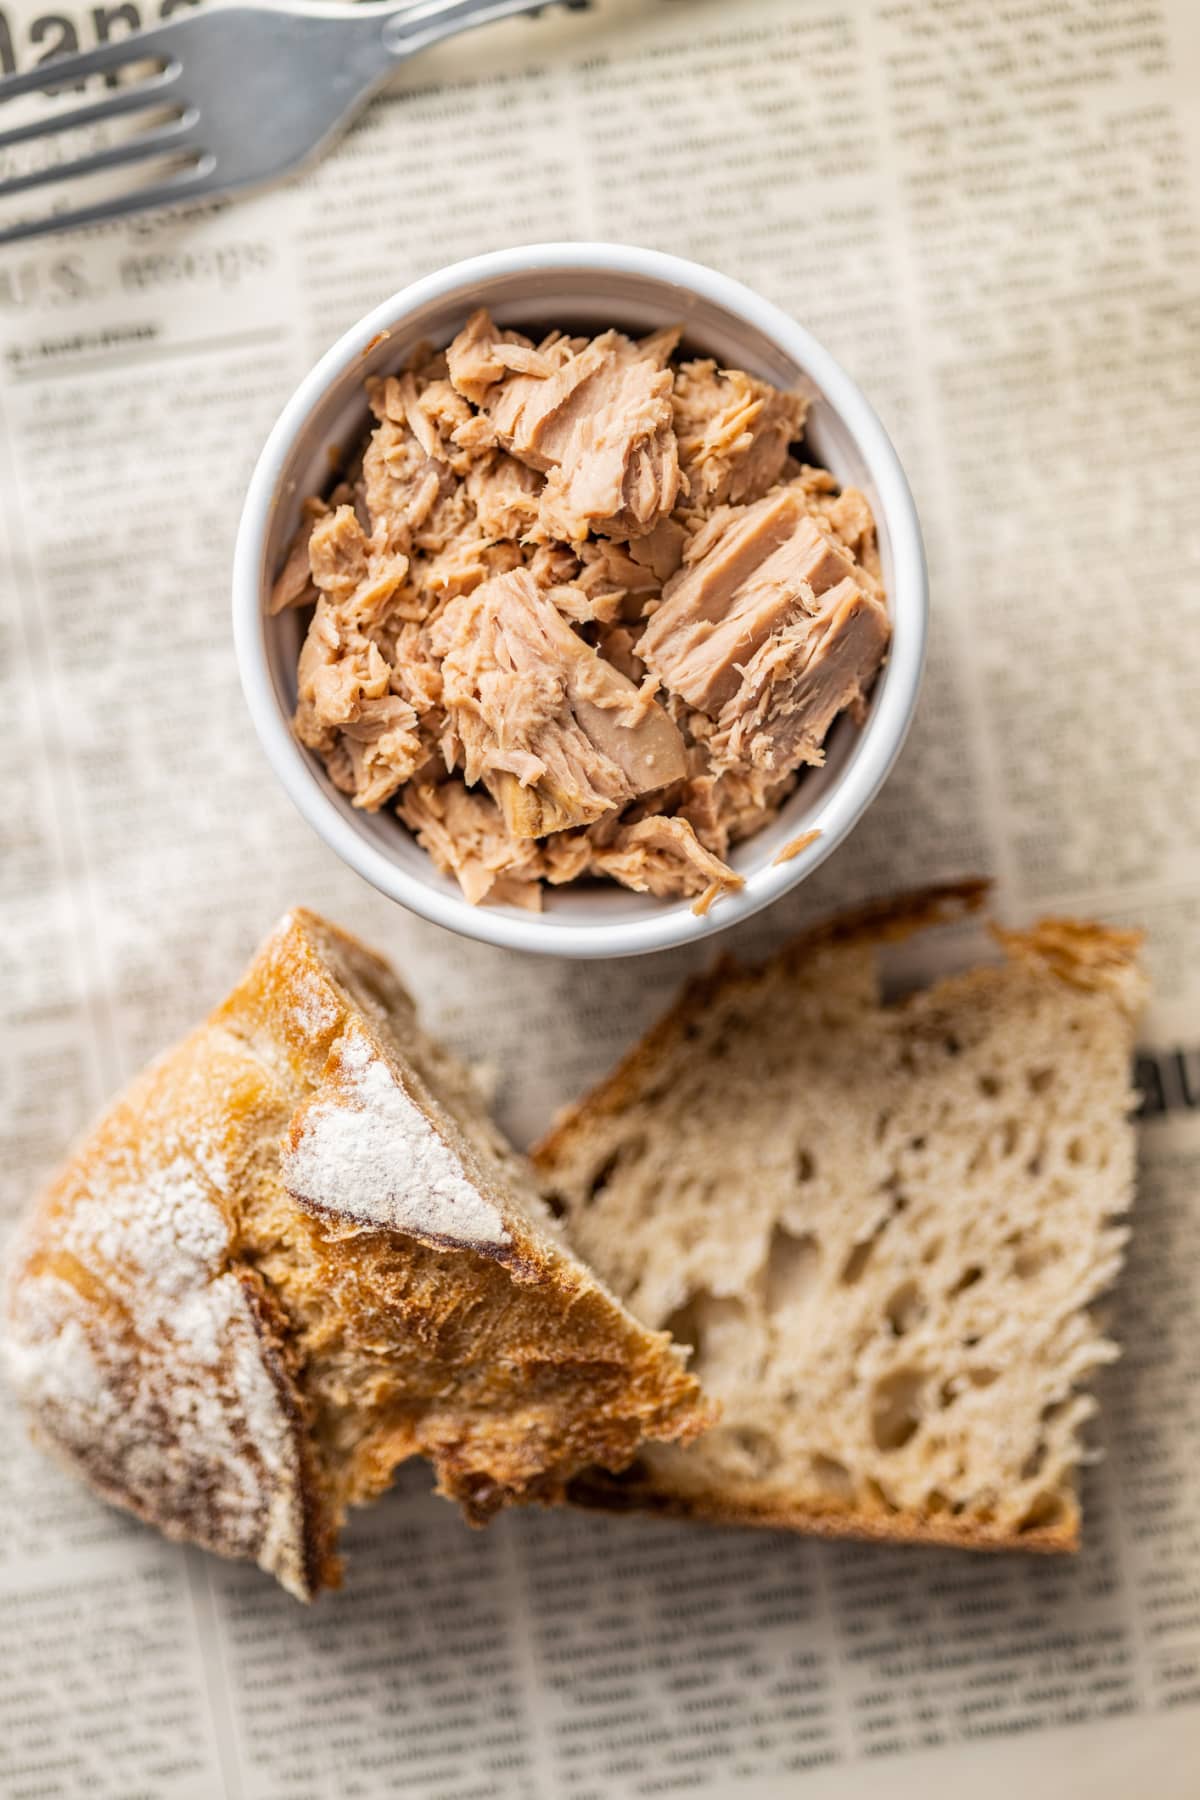 Canned tuna fish in a white bowl with pieces of bread below and a fork above